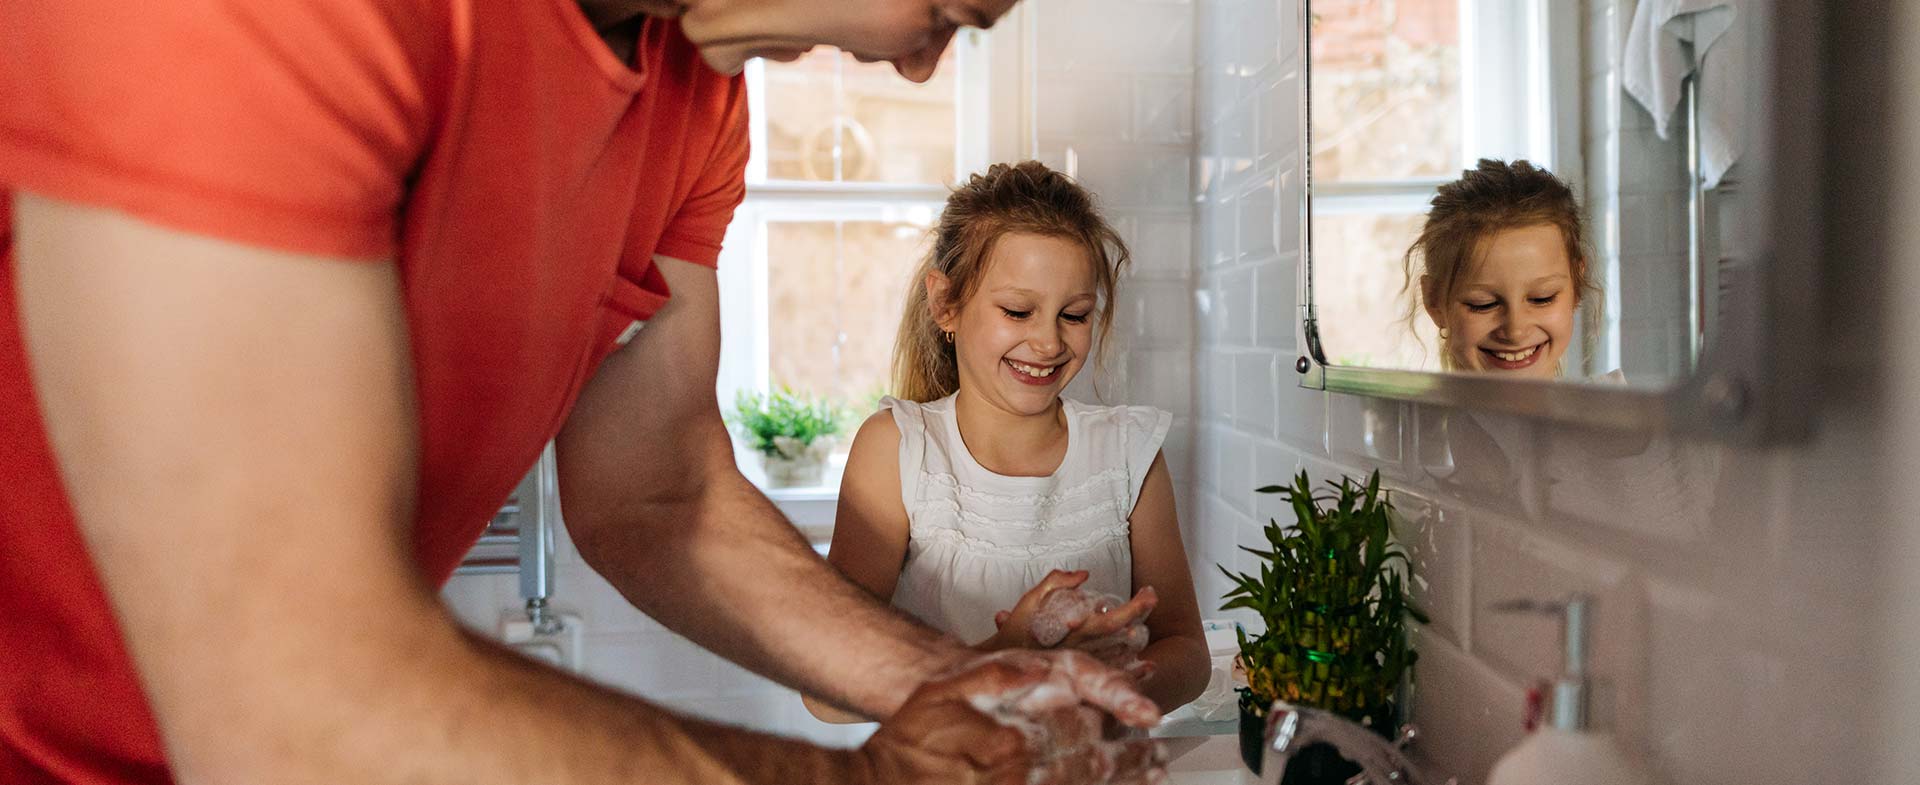 family washing hands